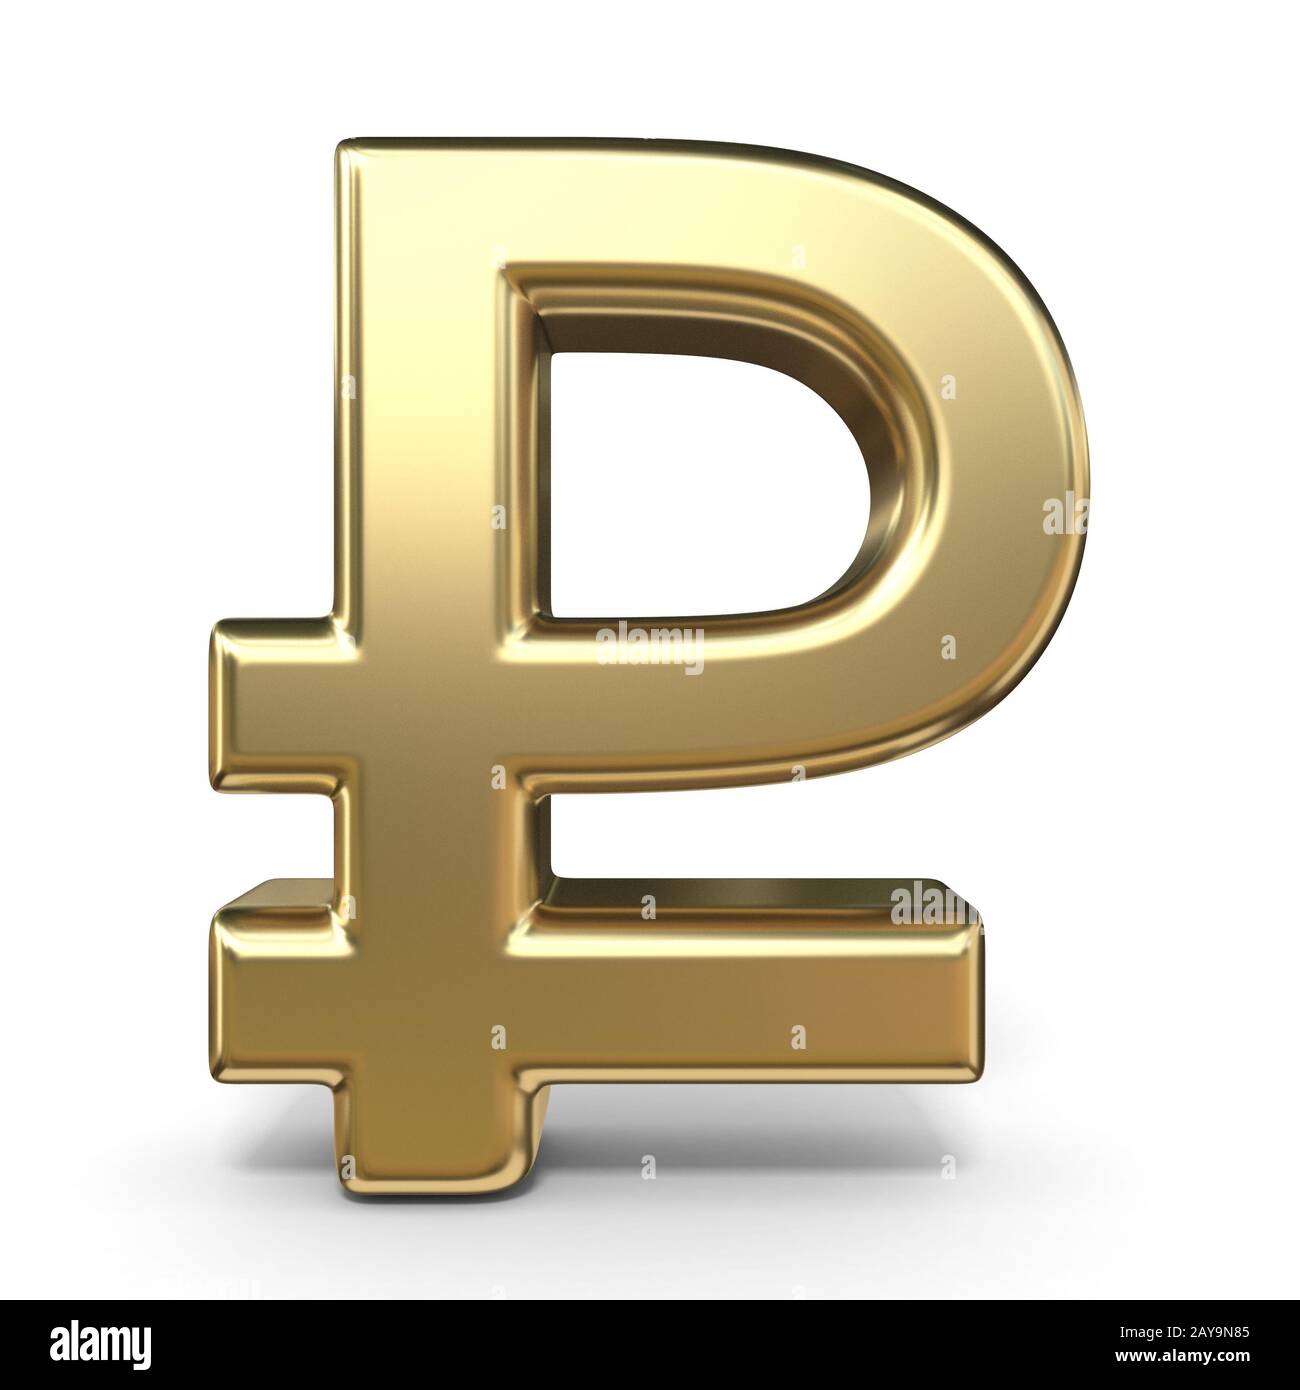 Golden currency symbol RUBLE 3D Stock Photo